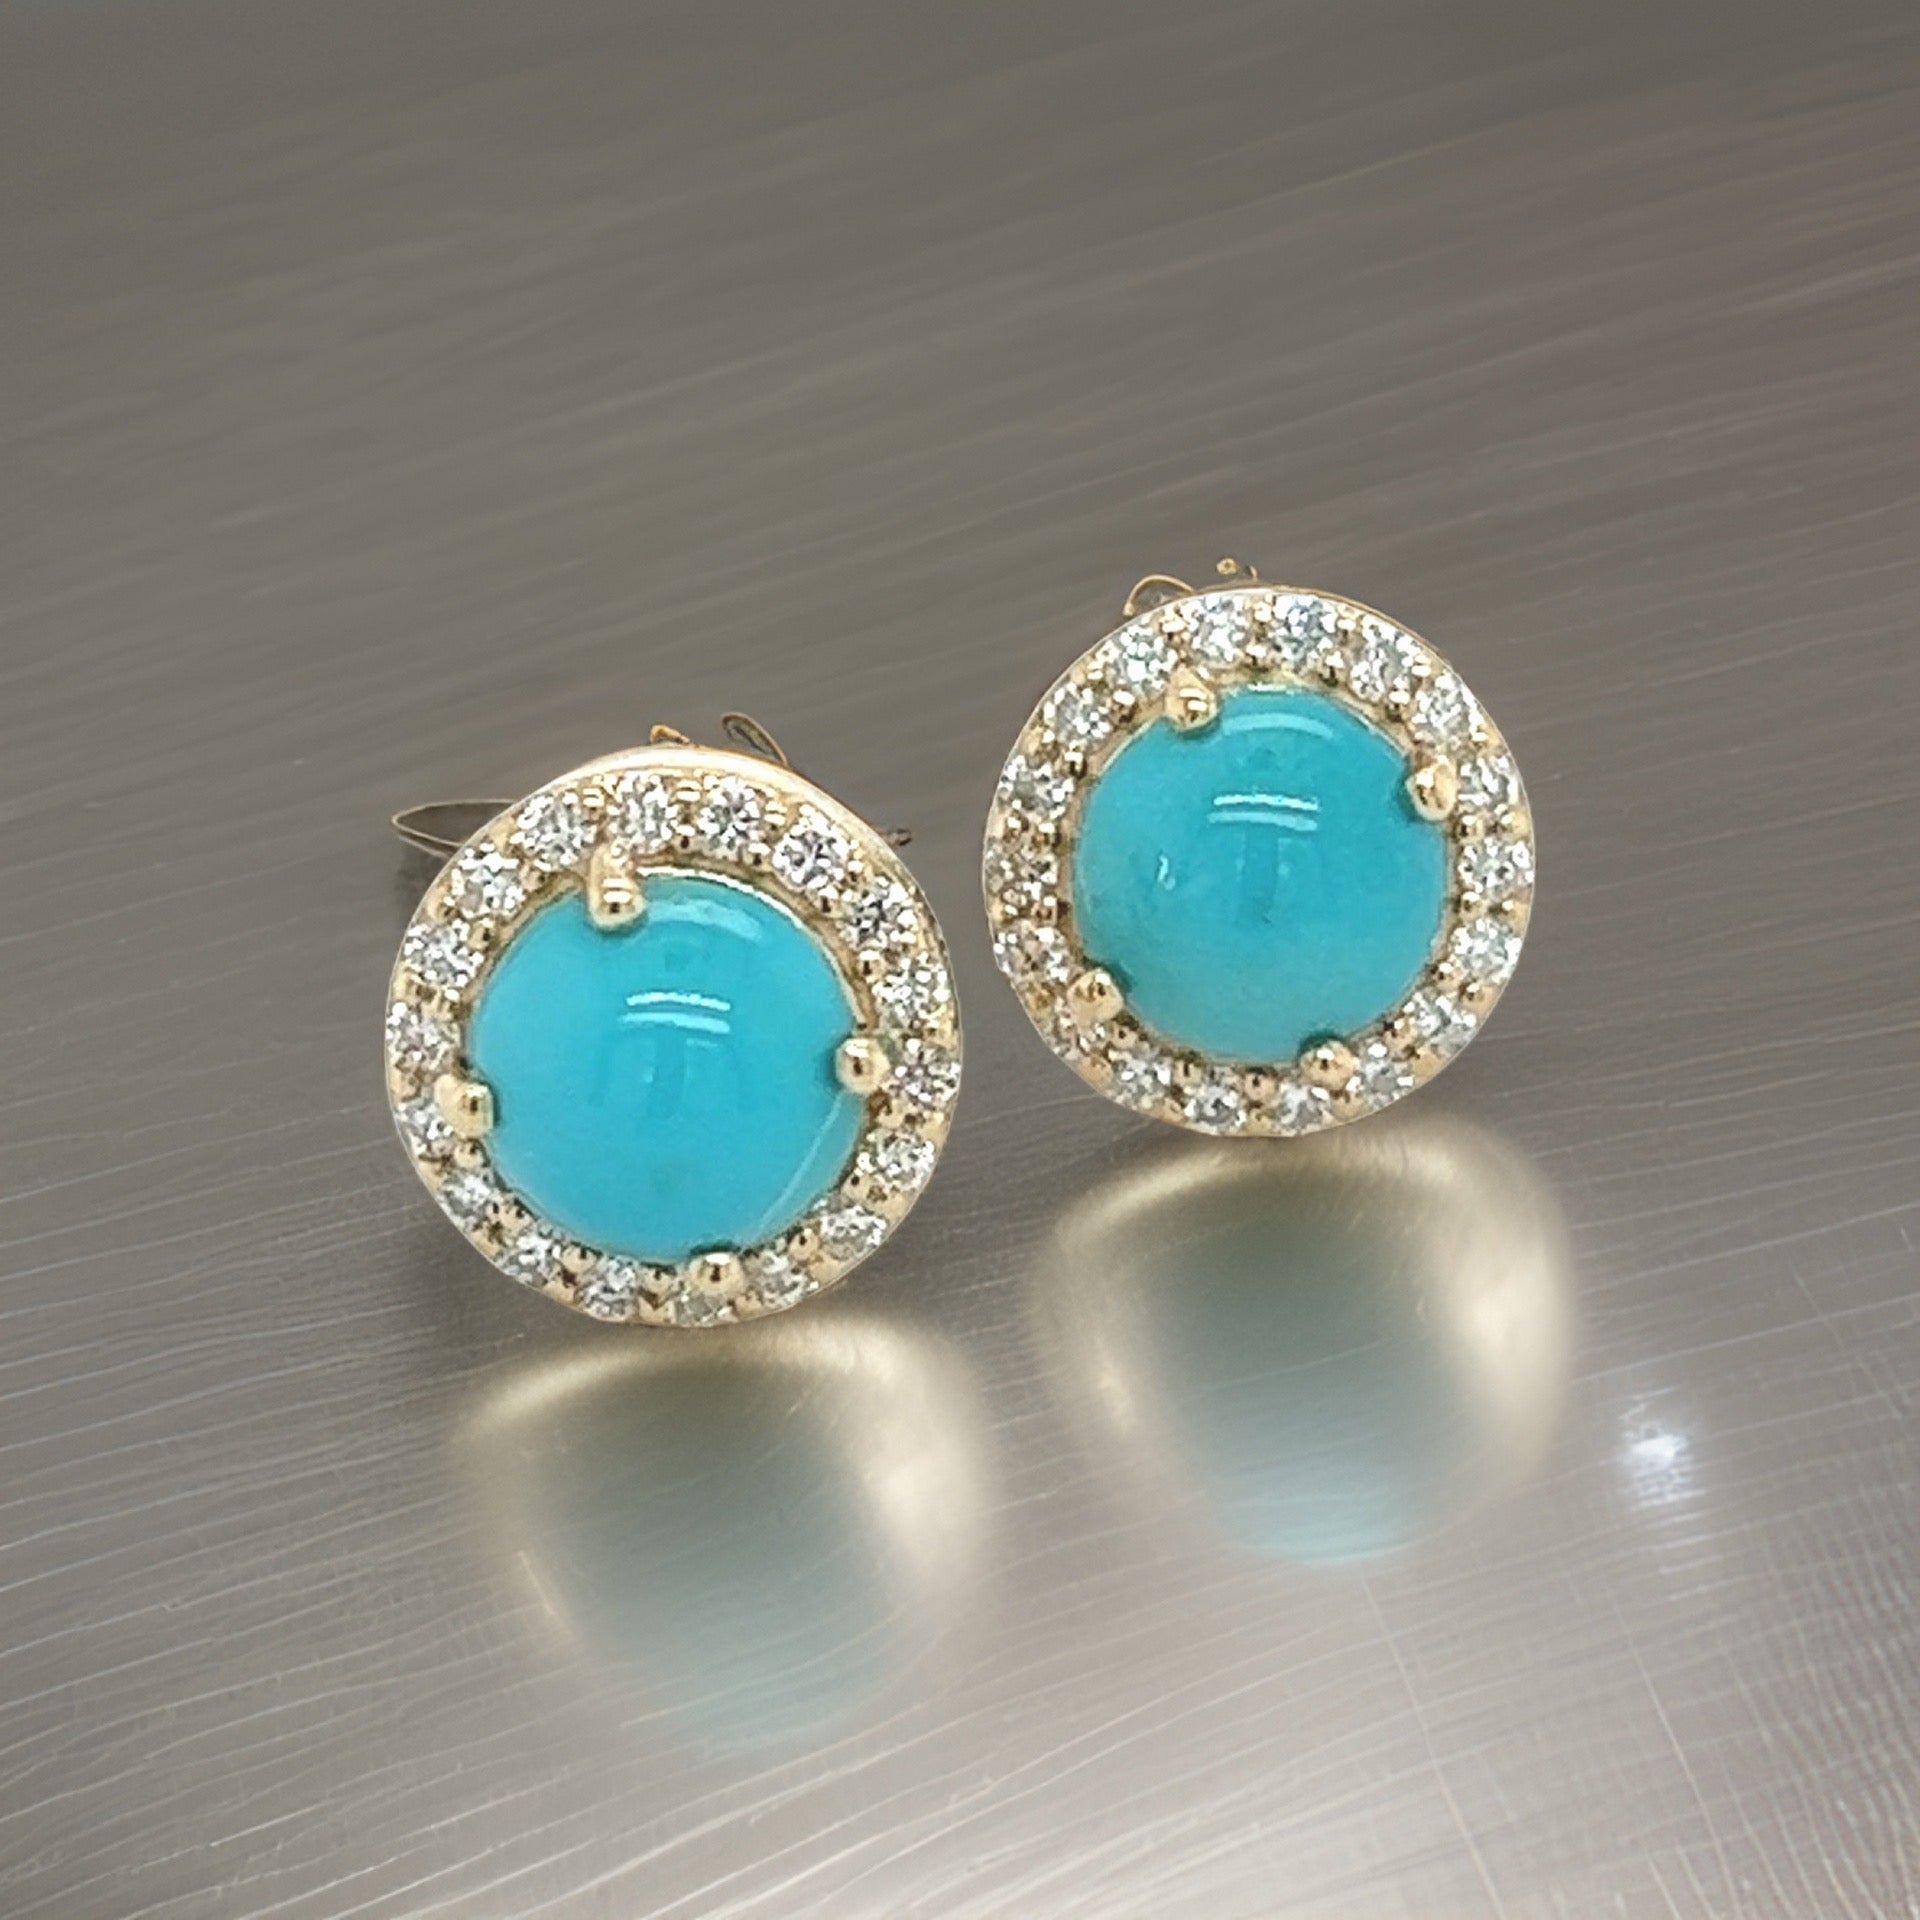 Natural Turquoise Diamond Stud Earrings 14k Yellow Gold 2.18 TCW Certified $2,490 217839 - Certified Fine Jewelry